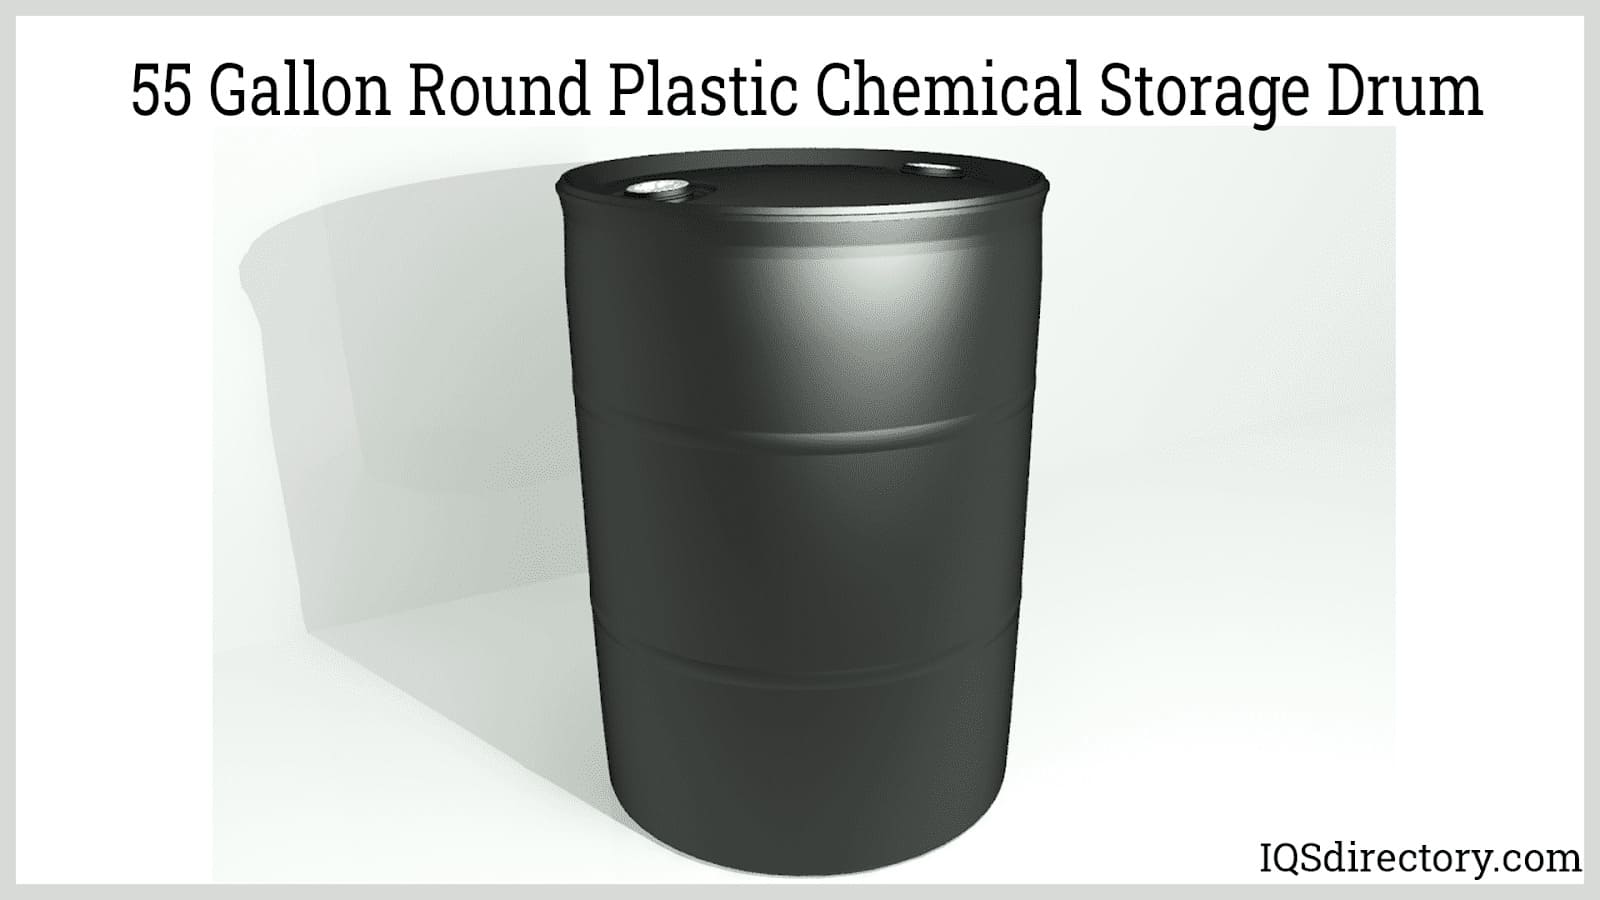 Types of Storage 55 Gallon Drums